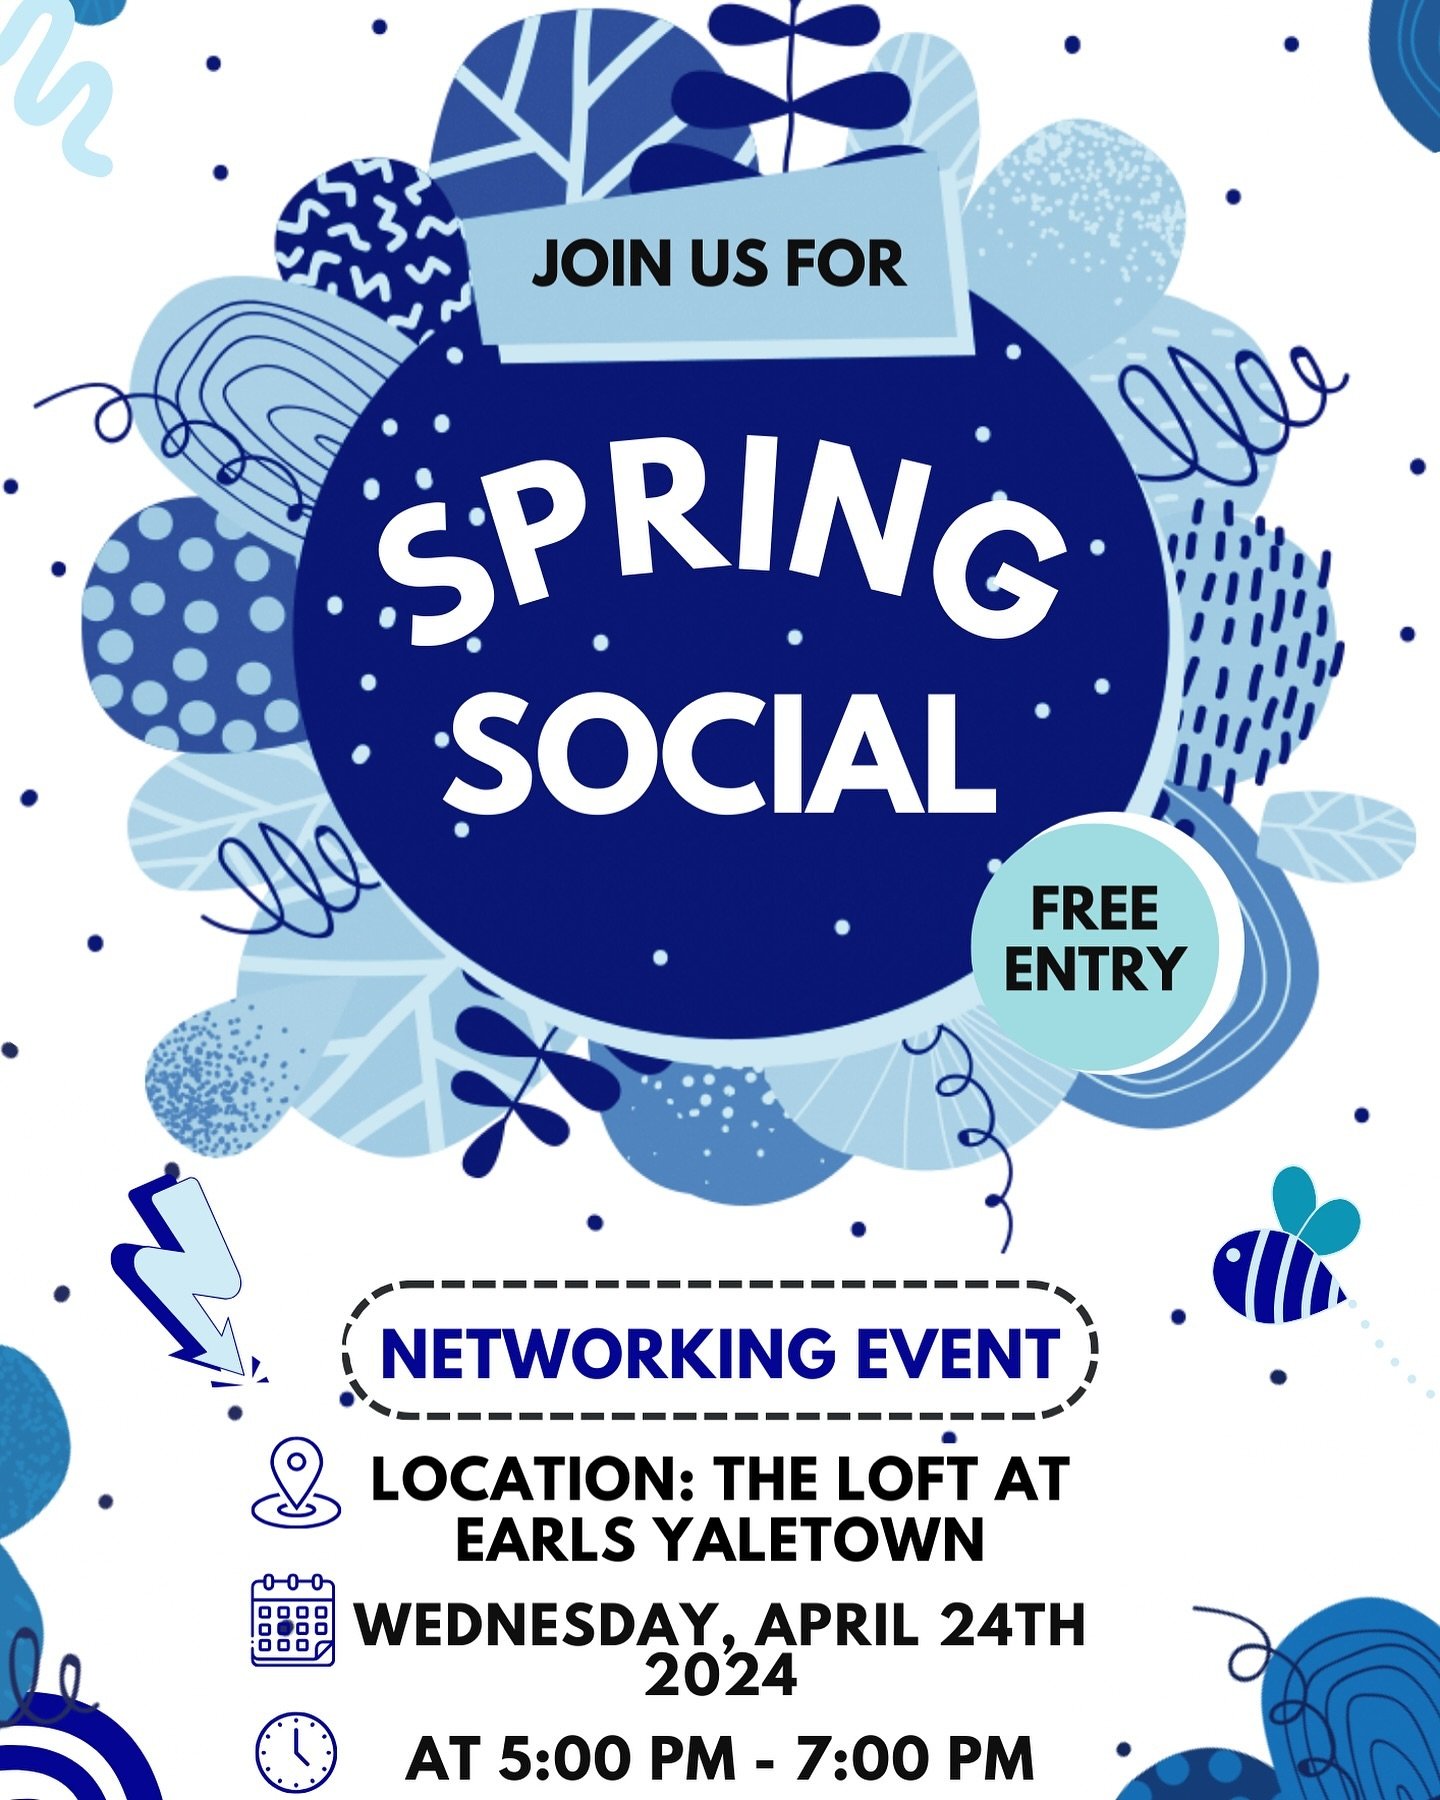 Tired of school and finals? Haven&rsquo;t had the chance to attend any networking events yet?

Mark your calendar and join us at this off-campus exclusive networking event! We&rsquo;ll have top professionals from multiple firms for you to connect wit